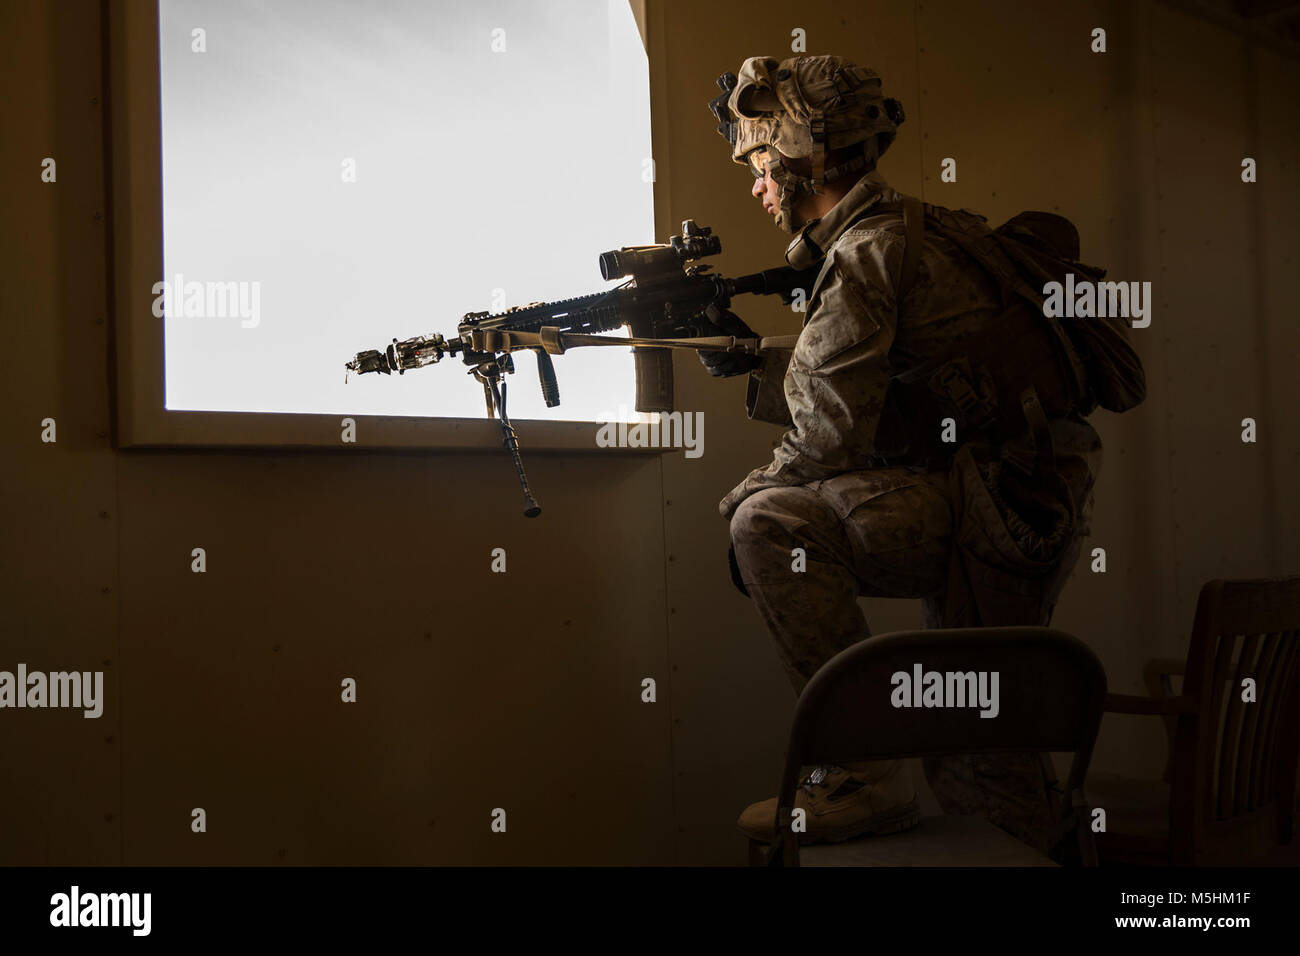 A Marine with 3rd Battalion, 7th Marine Regiment, posts security through a building window at Range 220 aboard the Marine Corps Air Ground Combat Center, Twentynine Palms Calif., Feb. 9, 2018 as part of Integrated Training Exercise 2-18. The purpose of ITX is to create a challenging, realistic training environment that produces combat-ready forces capable of operating as an integrated MAGTF. (U.S. Marine Corps Stock Photo